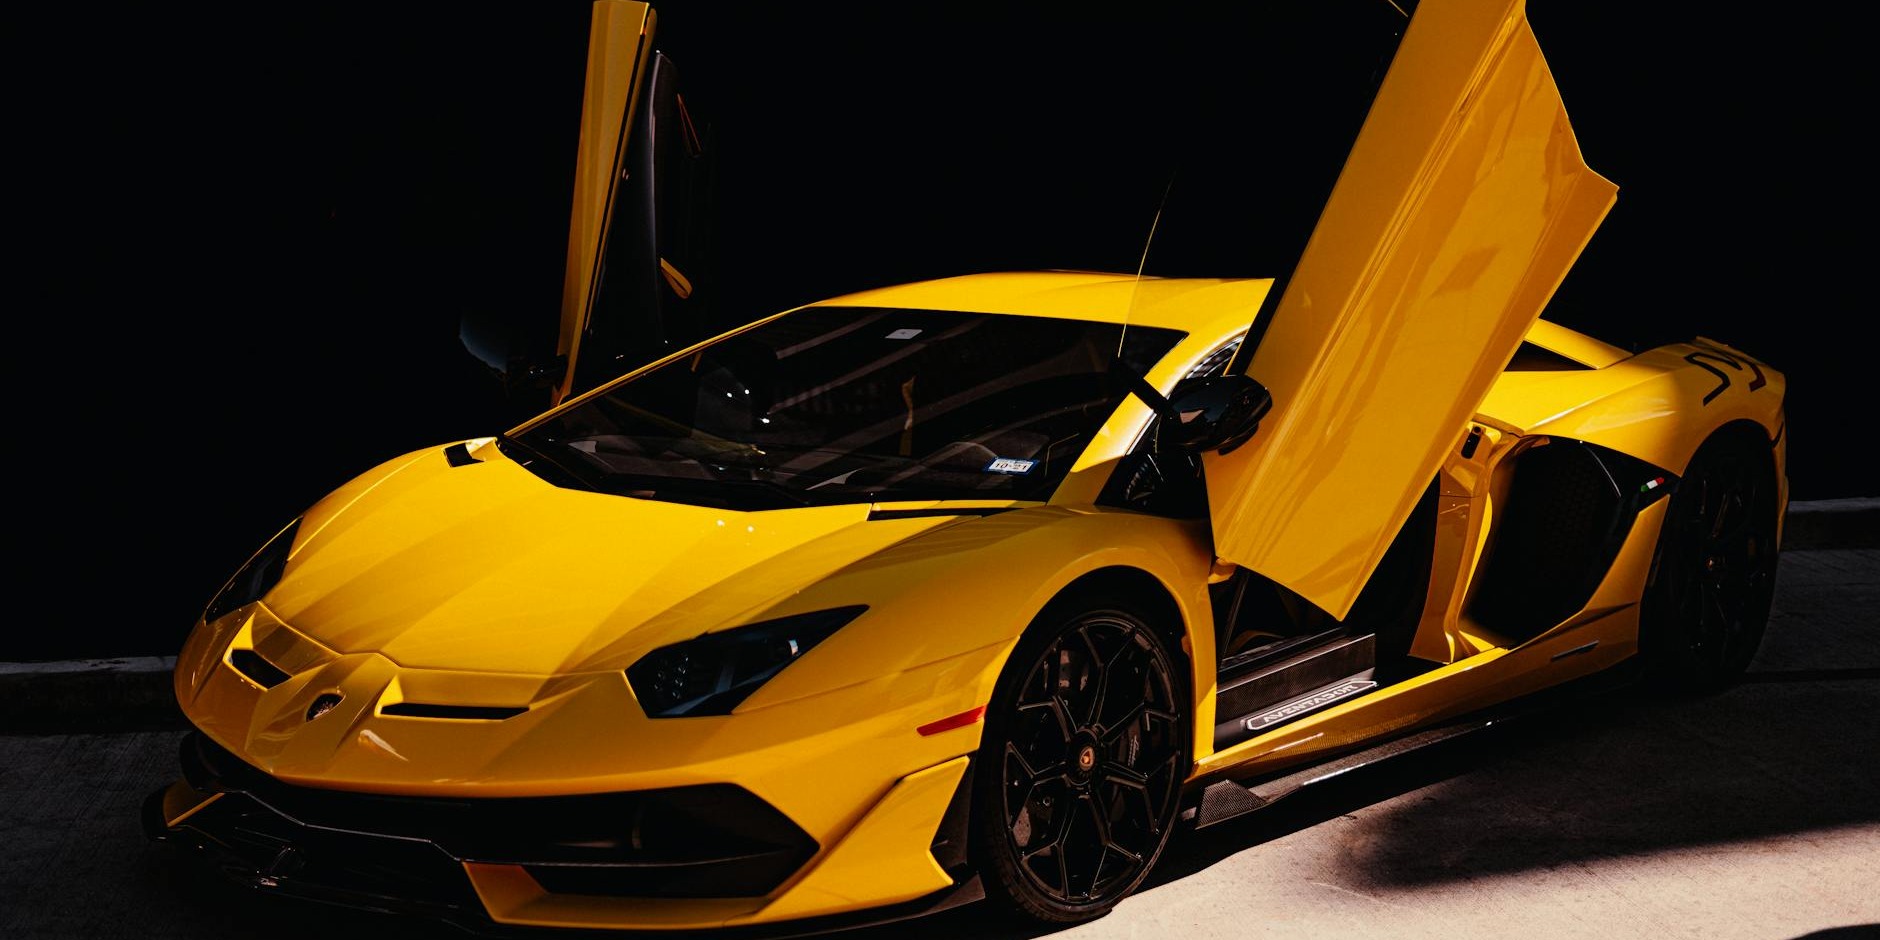 What Are the Key Differences Between Lamborghini Models?